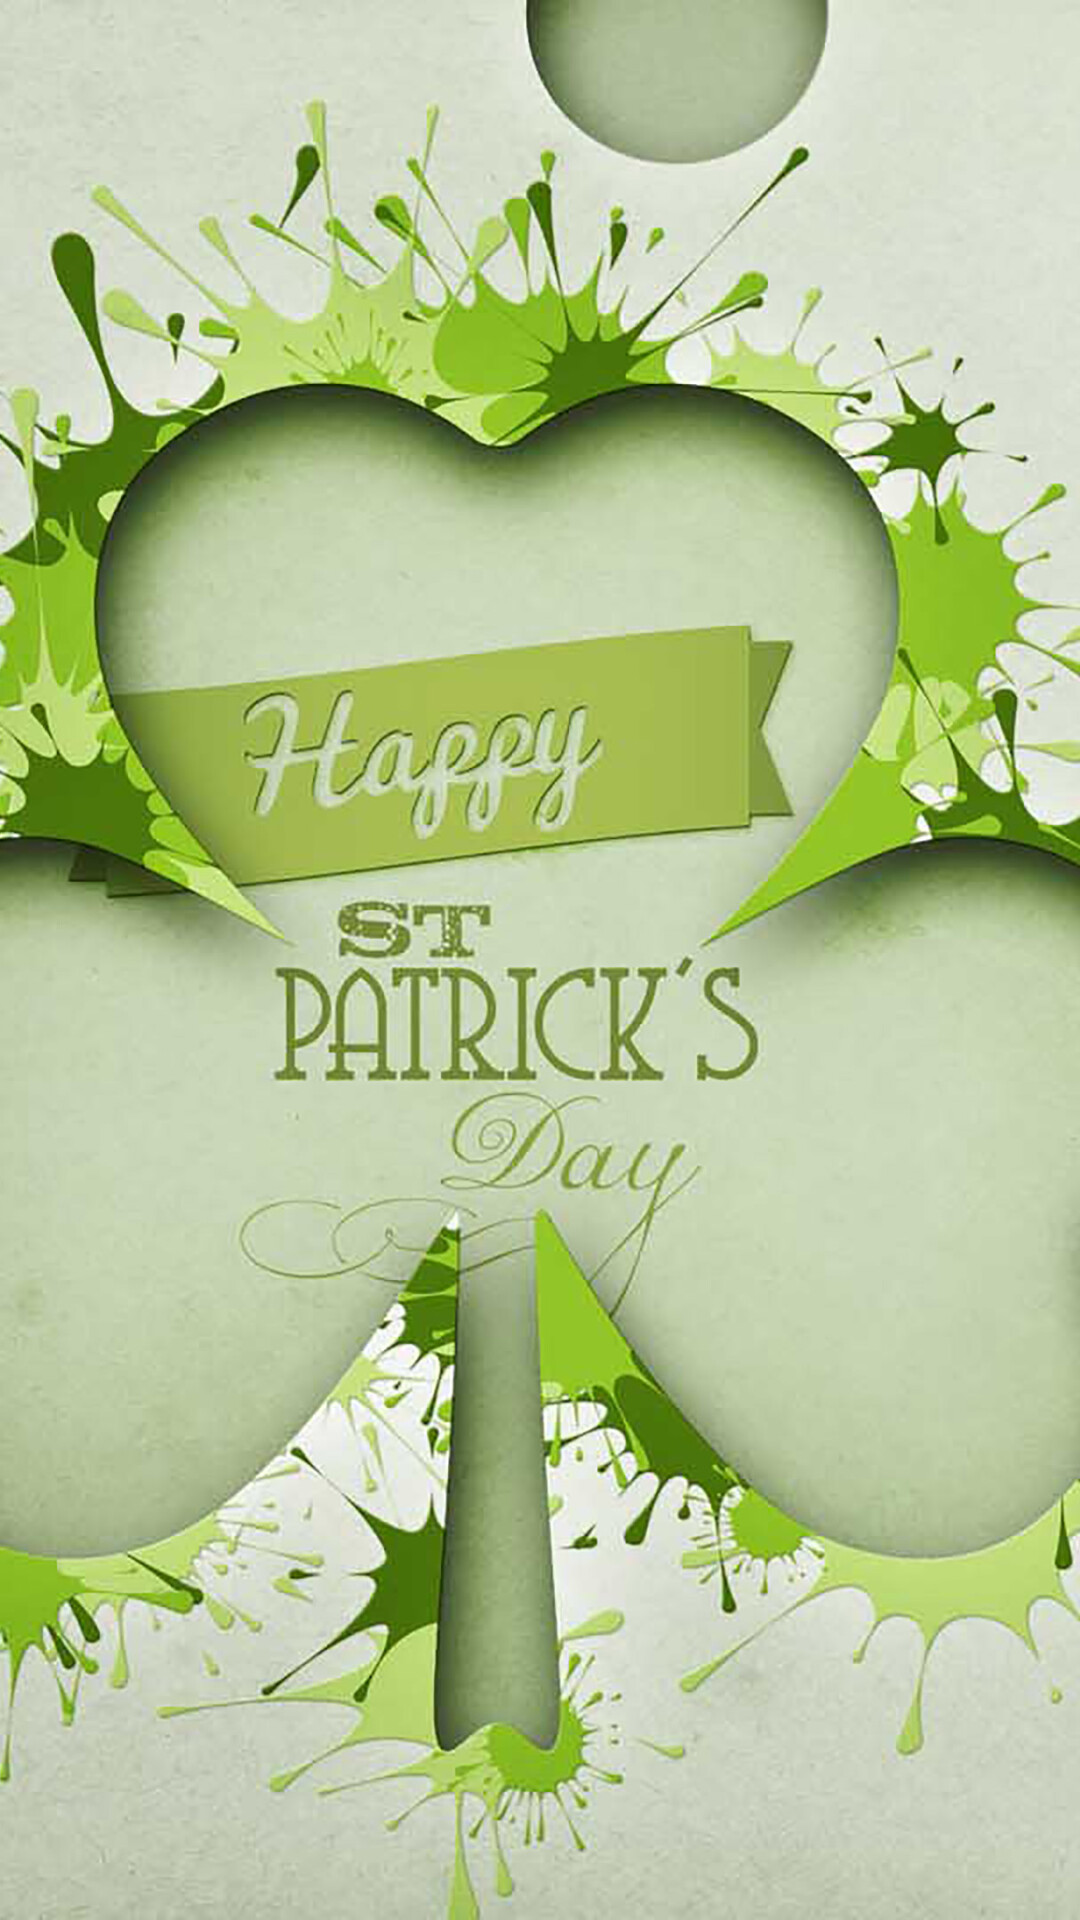 Saint Patrick's Day: Celebrated annually to commemorate the passing of the patron saint of Ireland. 1080x1920 Full HD Background.